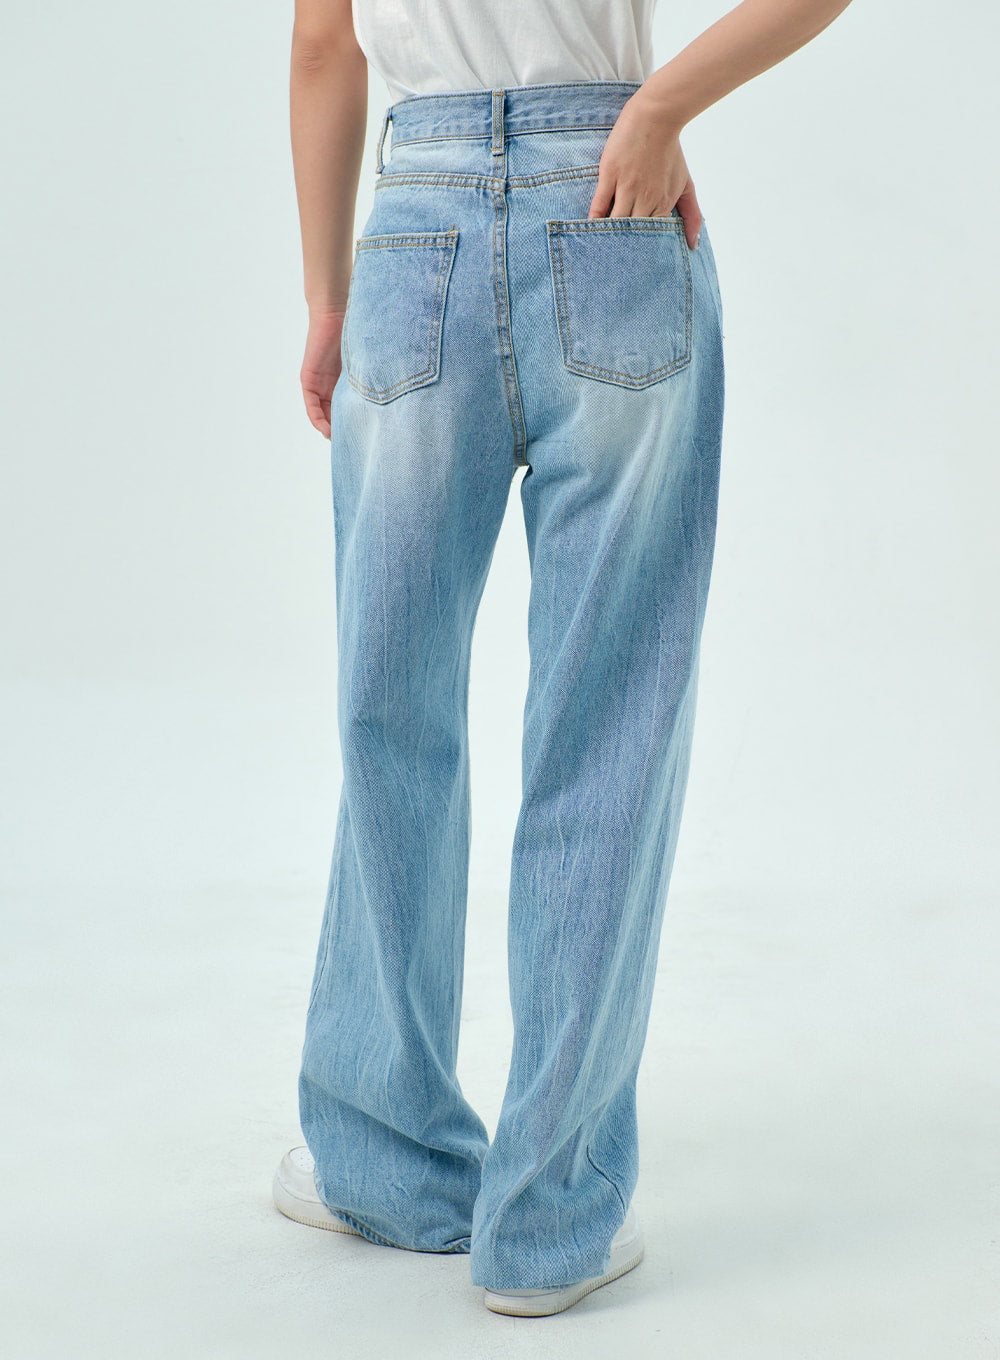 wide-light-wash-jeans-by322